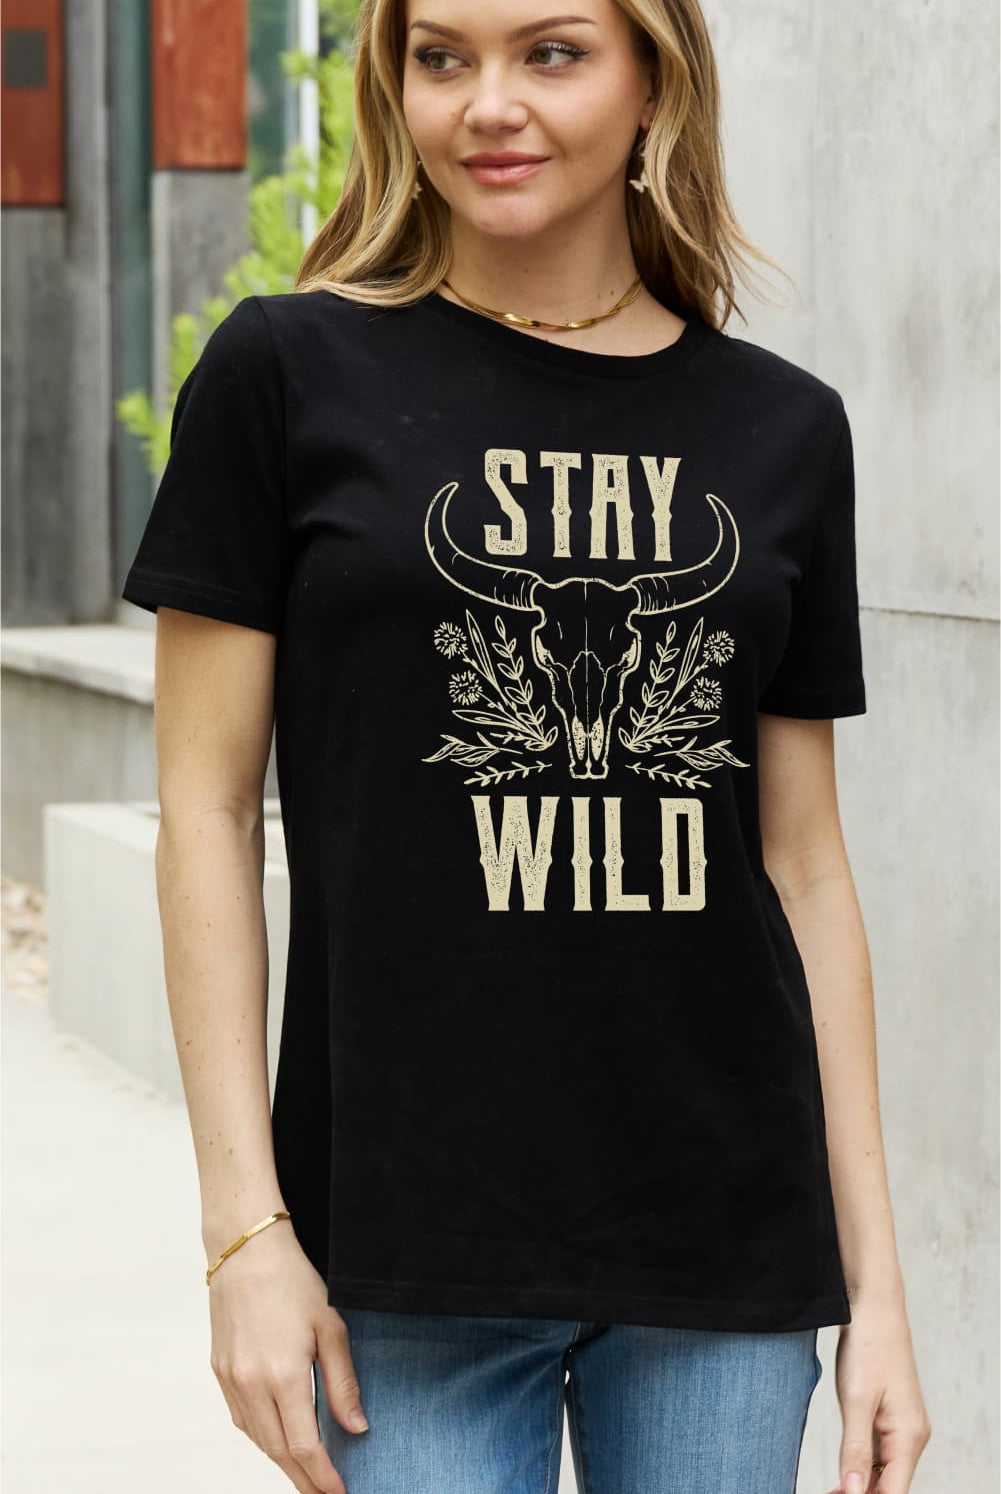 Light Gray Simply Love Full Size STAY WILD Graphic Cotton Tee Tops